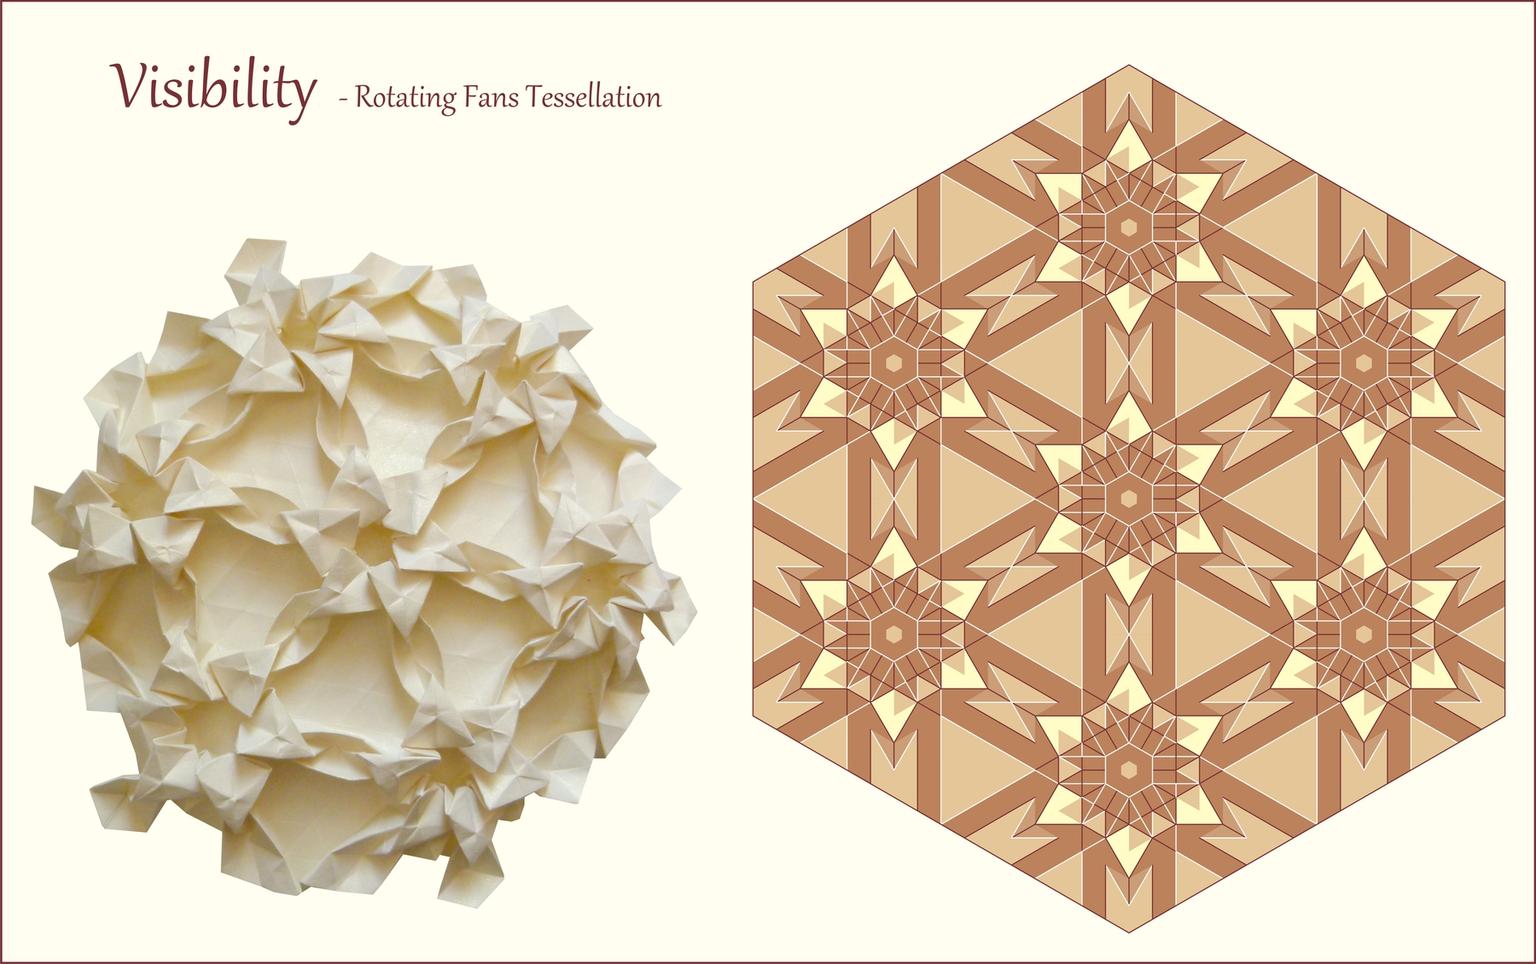 Image for entry 'Visibility - Rotating Fans Tessellation'